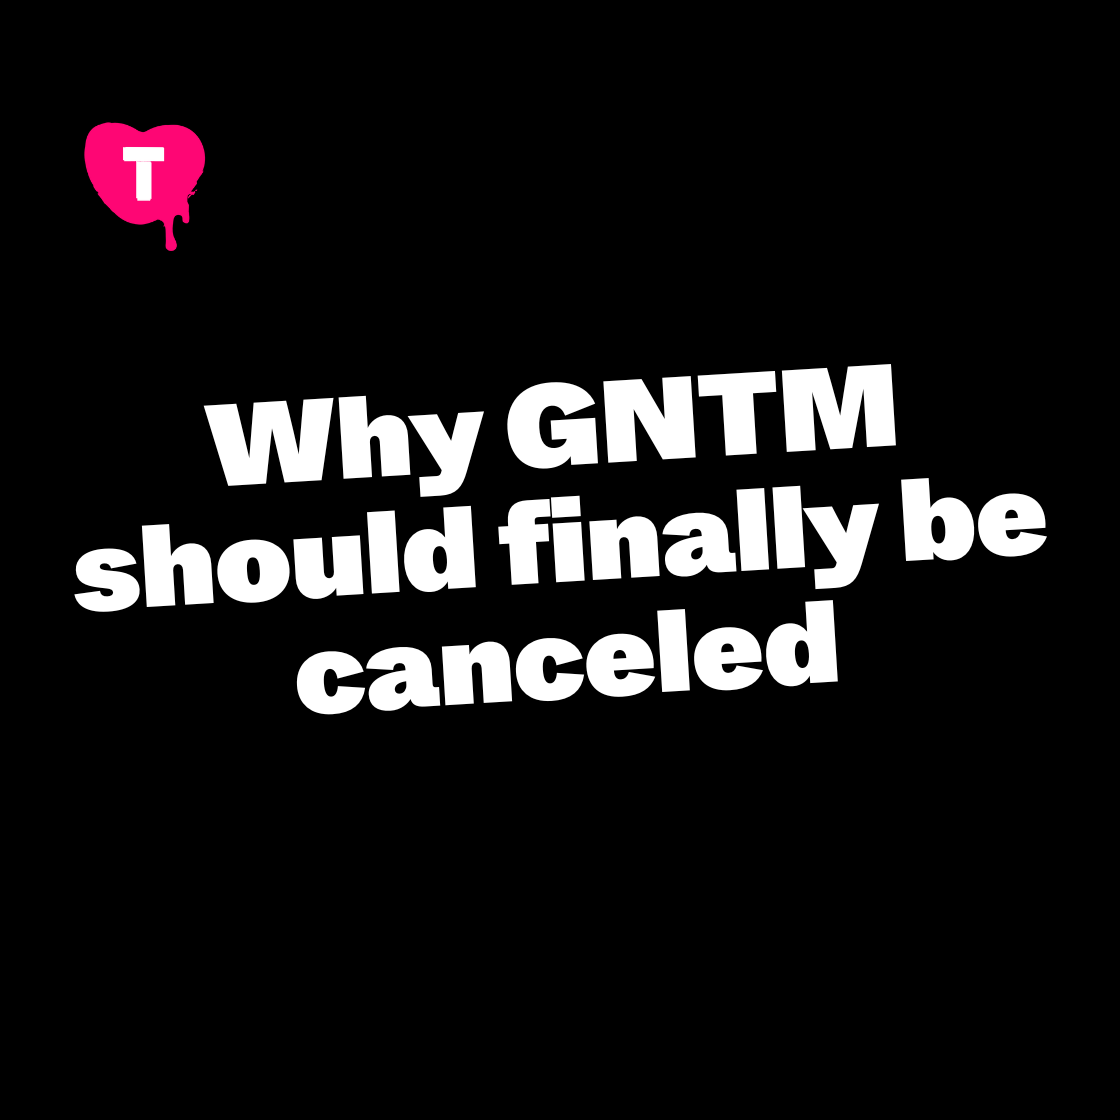 Why GNTM should finally be canceled